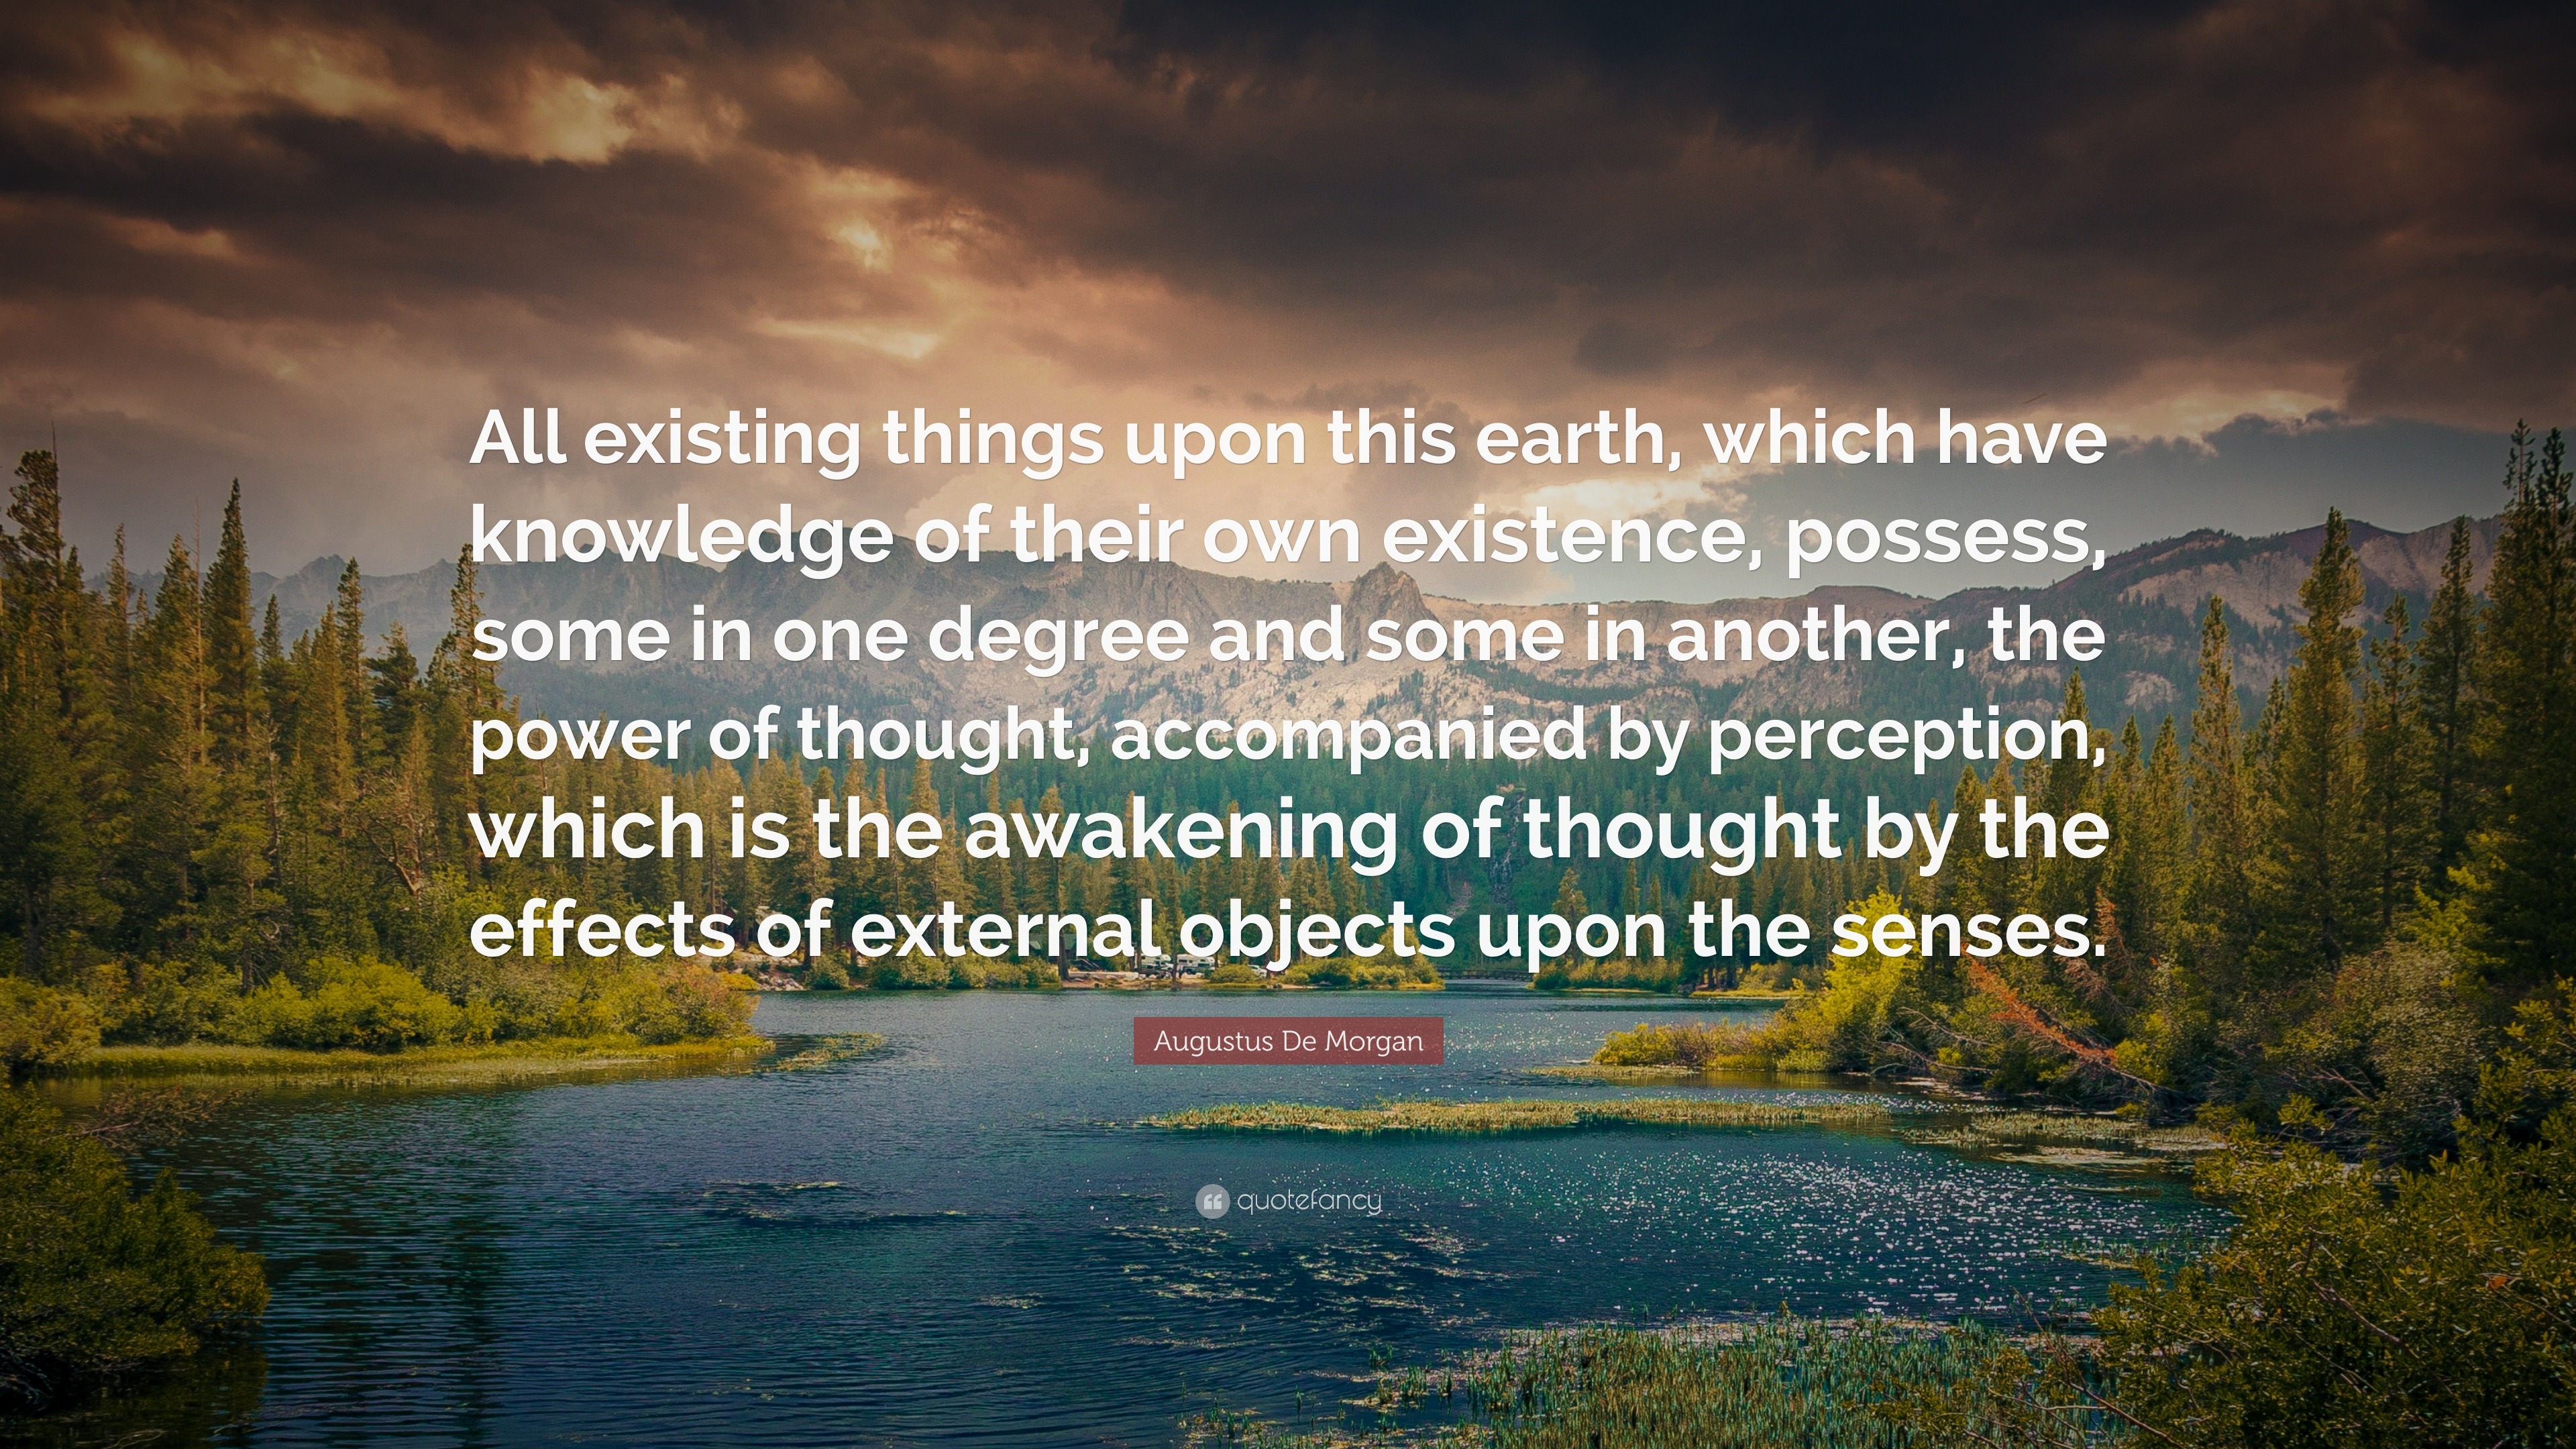 Augustus De Morgan Quote: “All existing things upon this earth, which ...